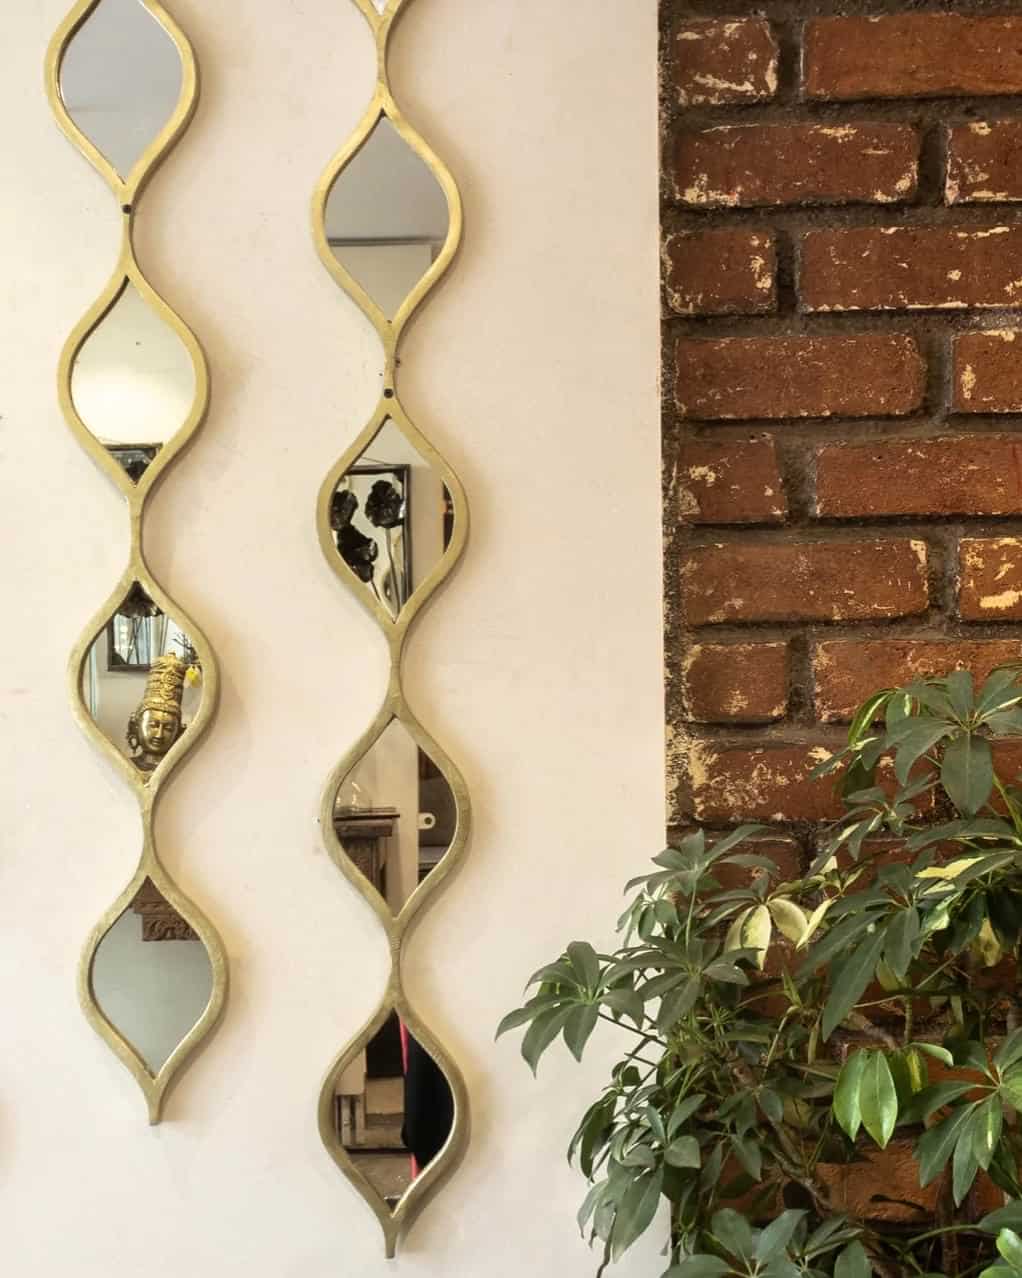 wave pattern wall hanging with mirrors and golden rims